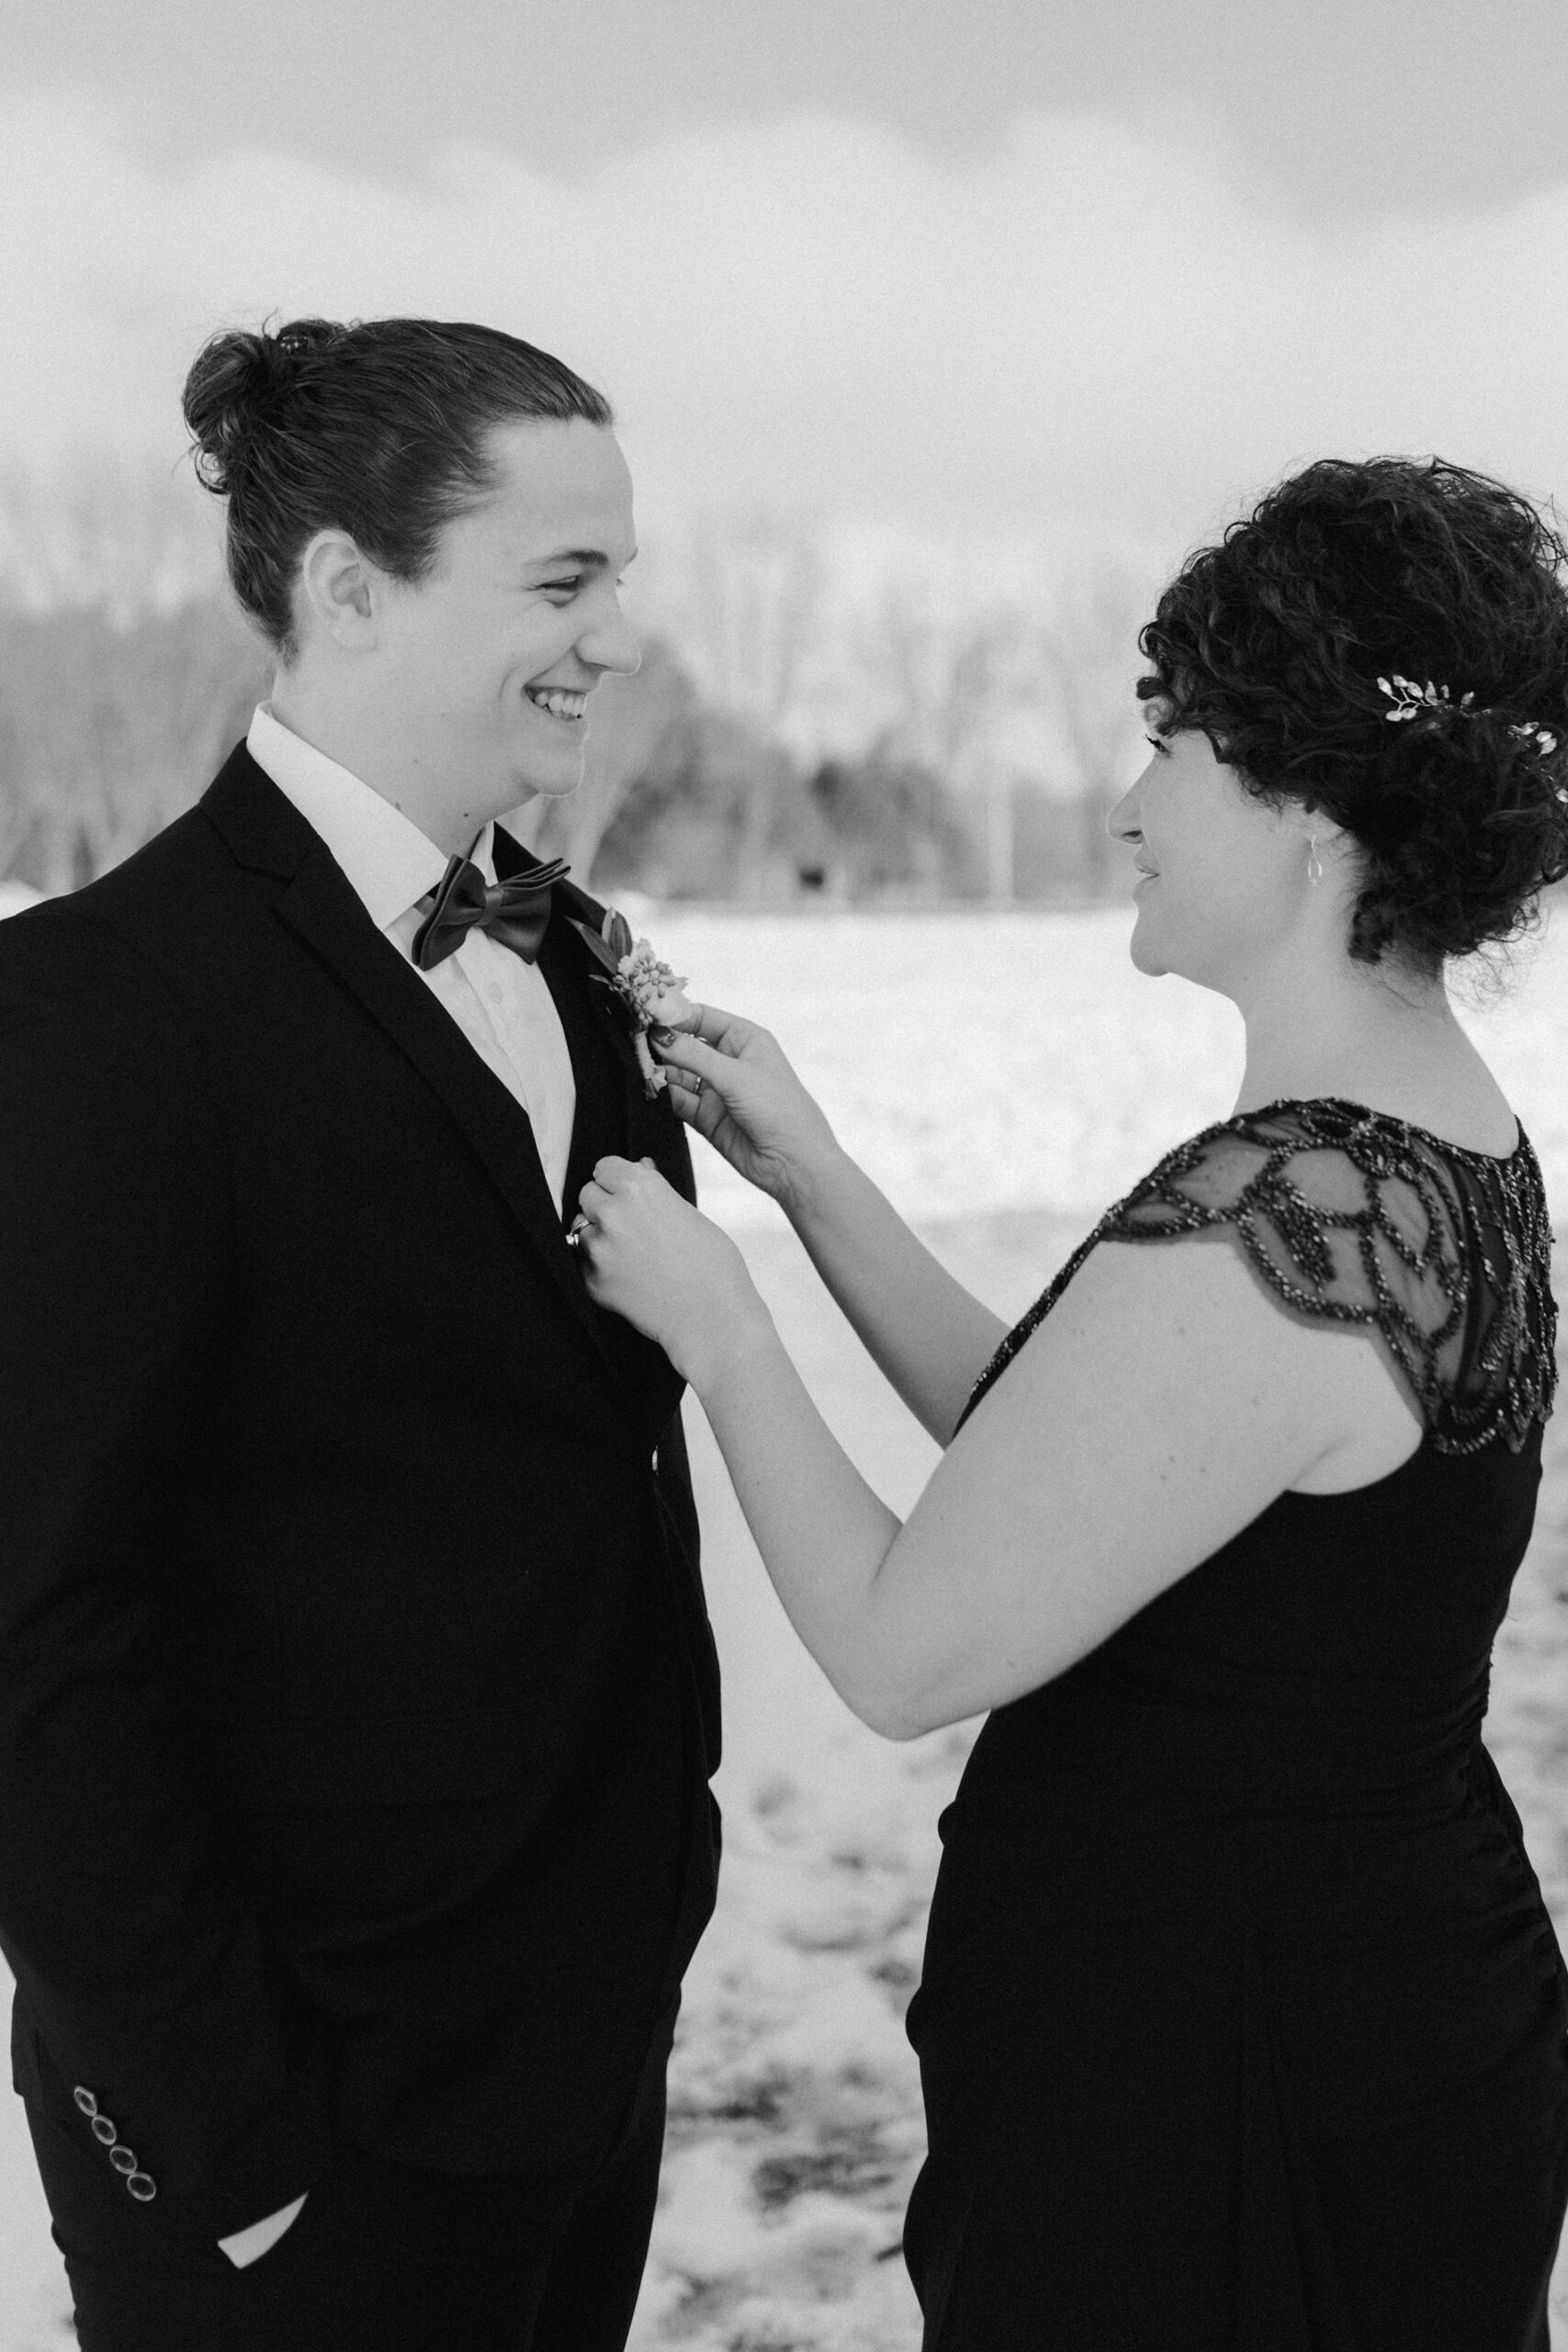 Snowy Central Wisconsin Wedding Photographed by Claire Neville Photography